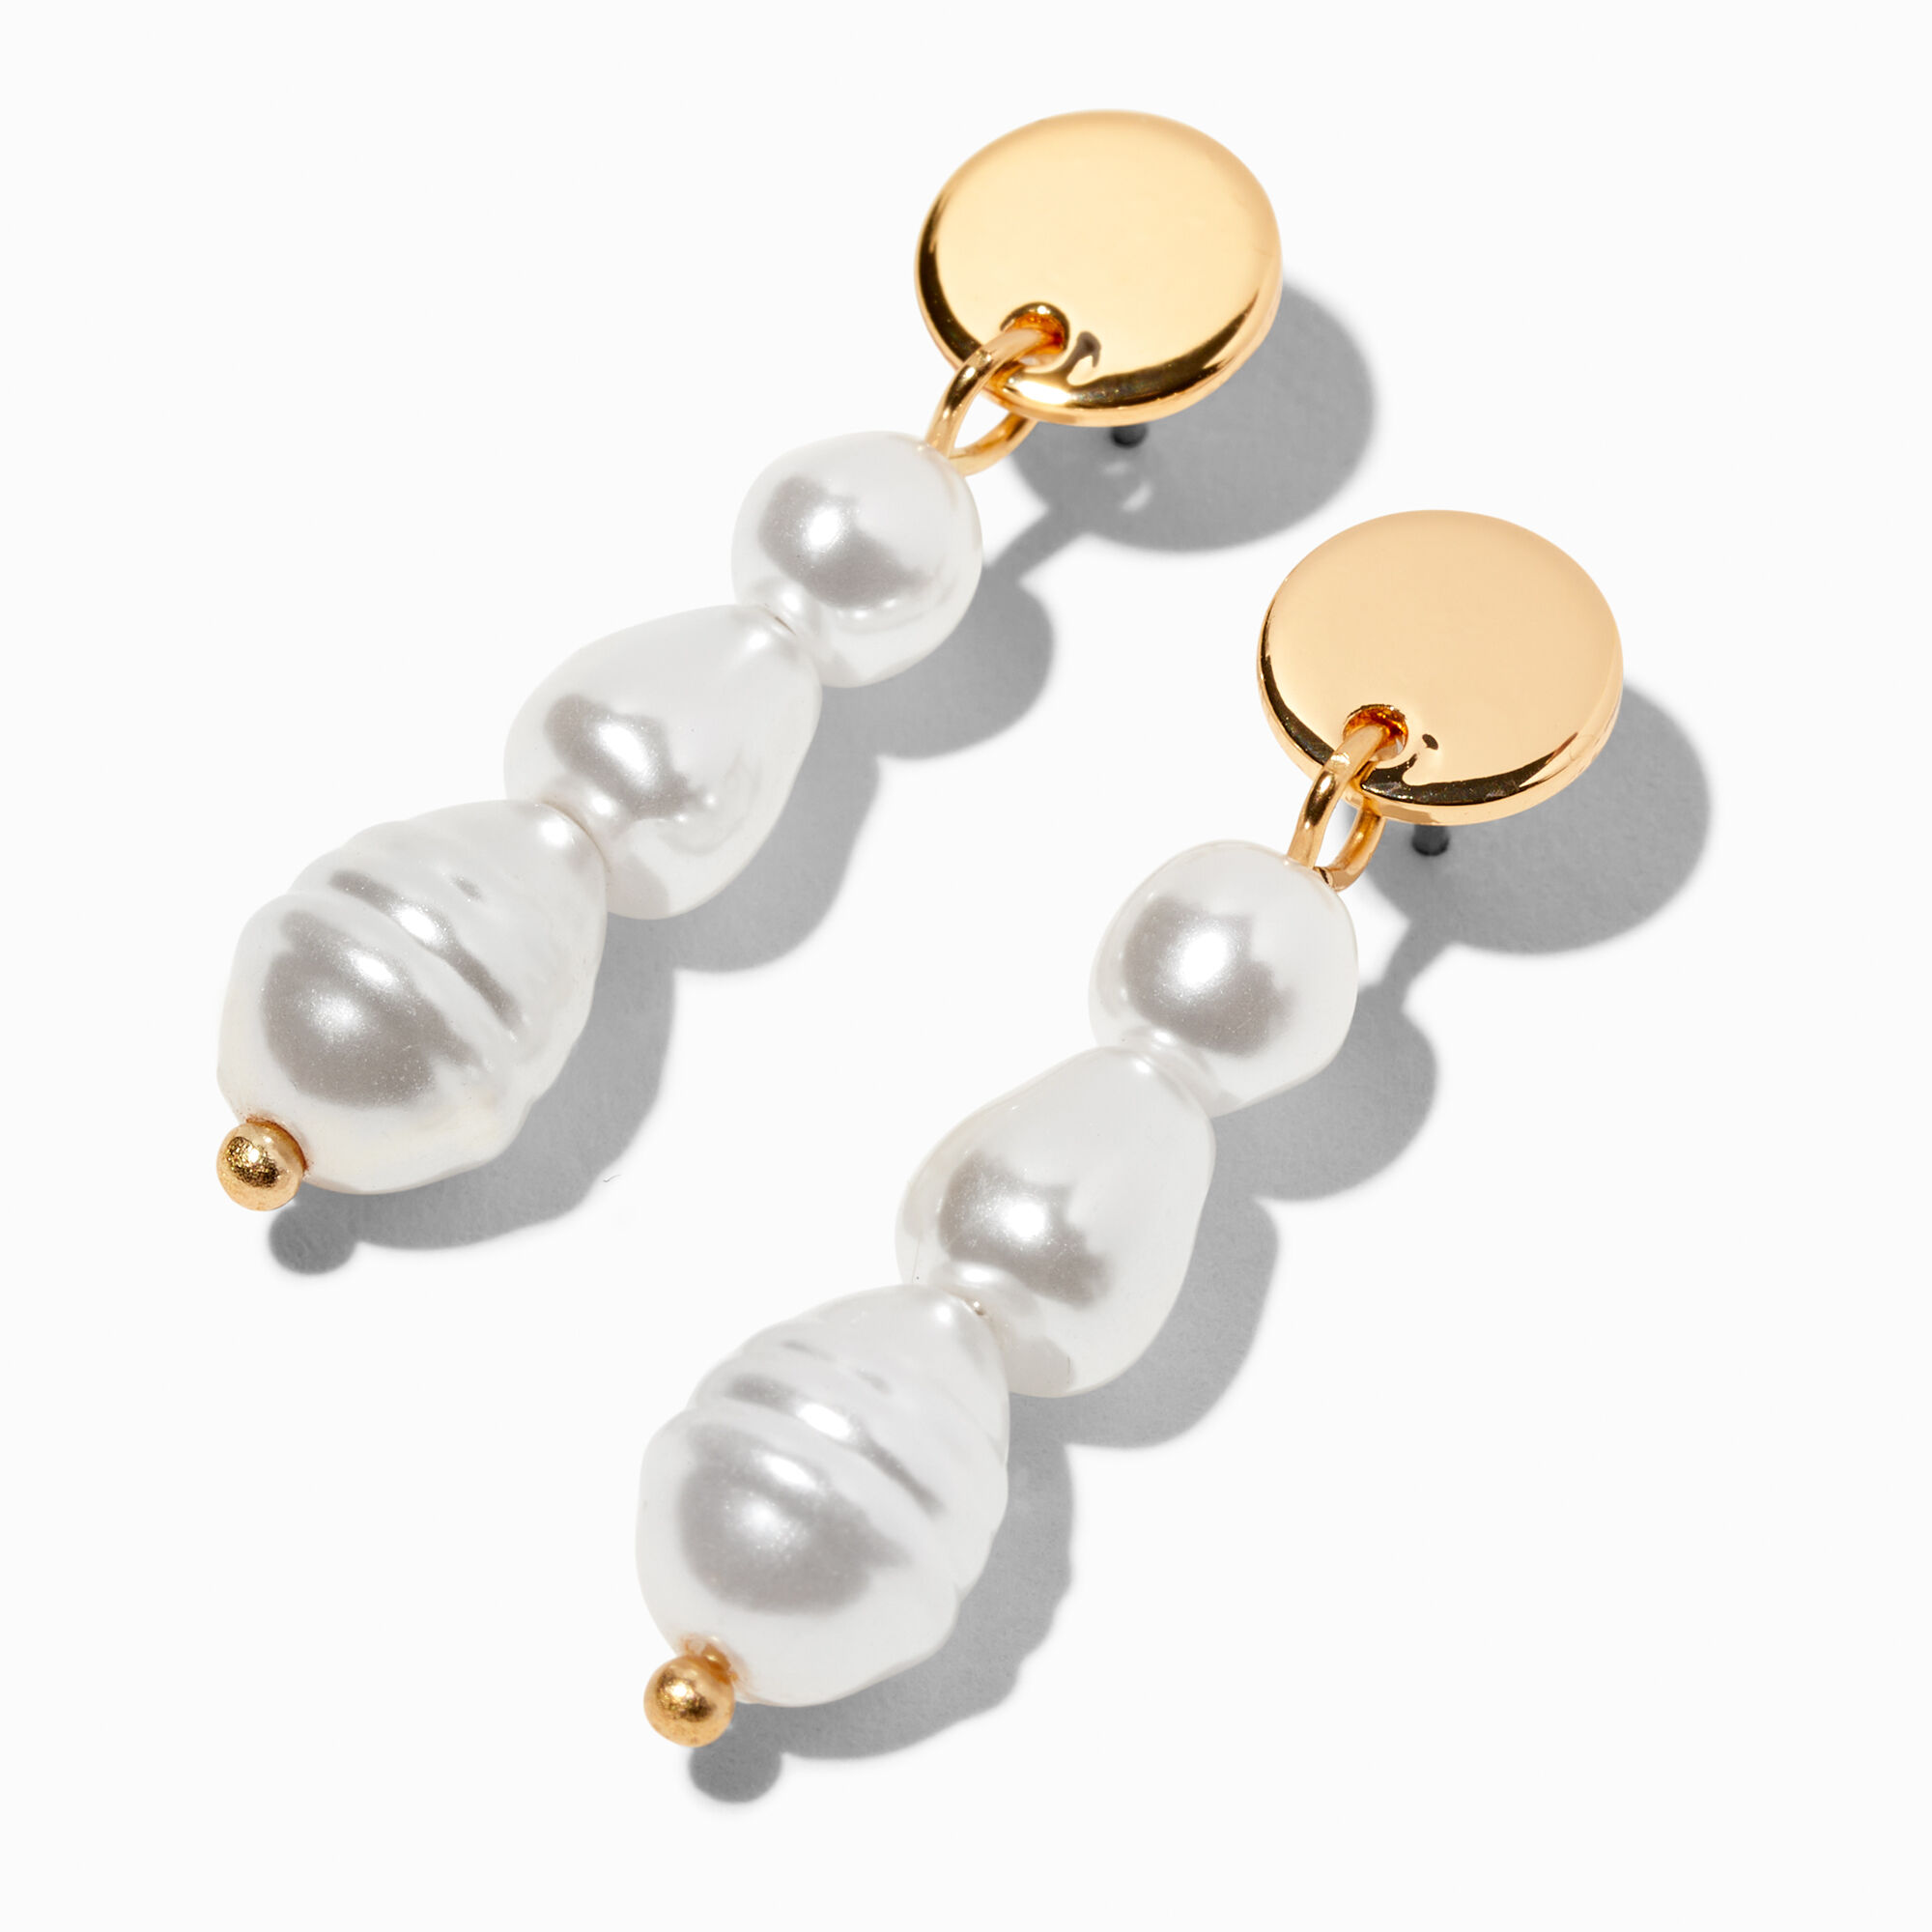 View Claires Tone 1 Pearl Drop Earrings Gold information